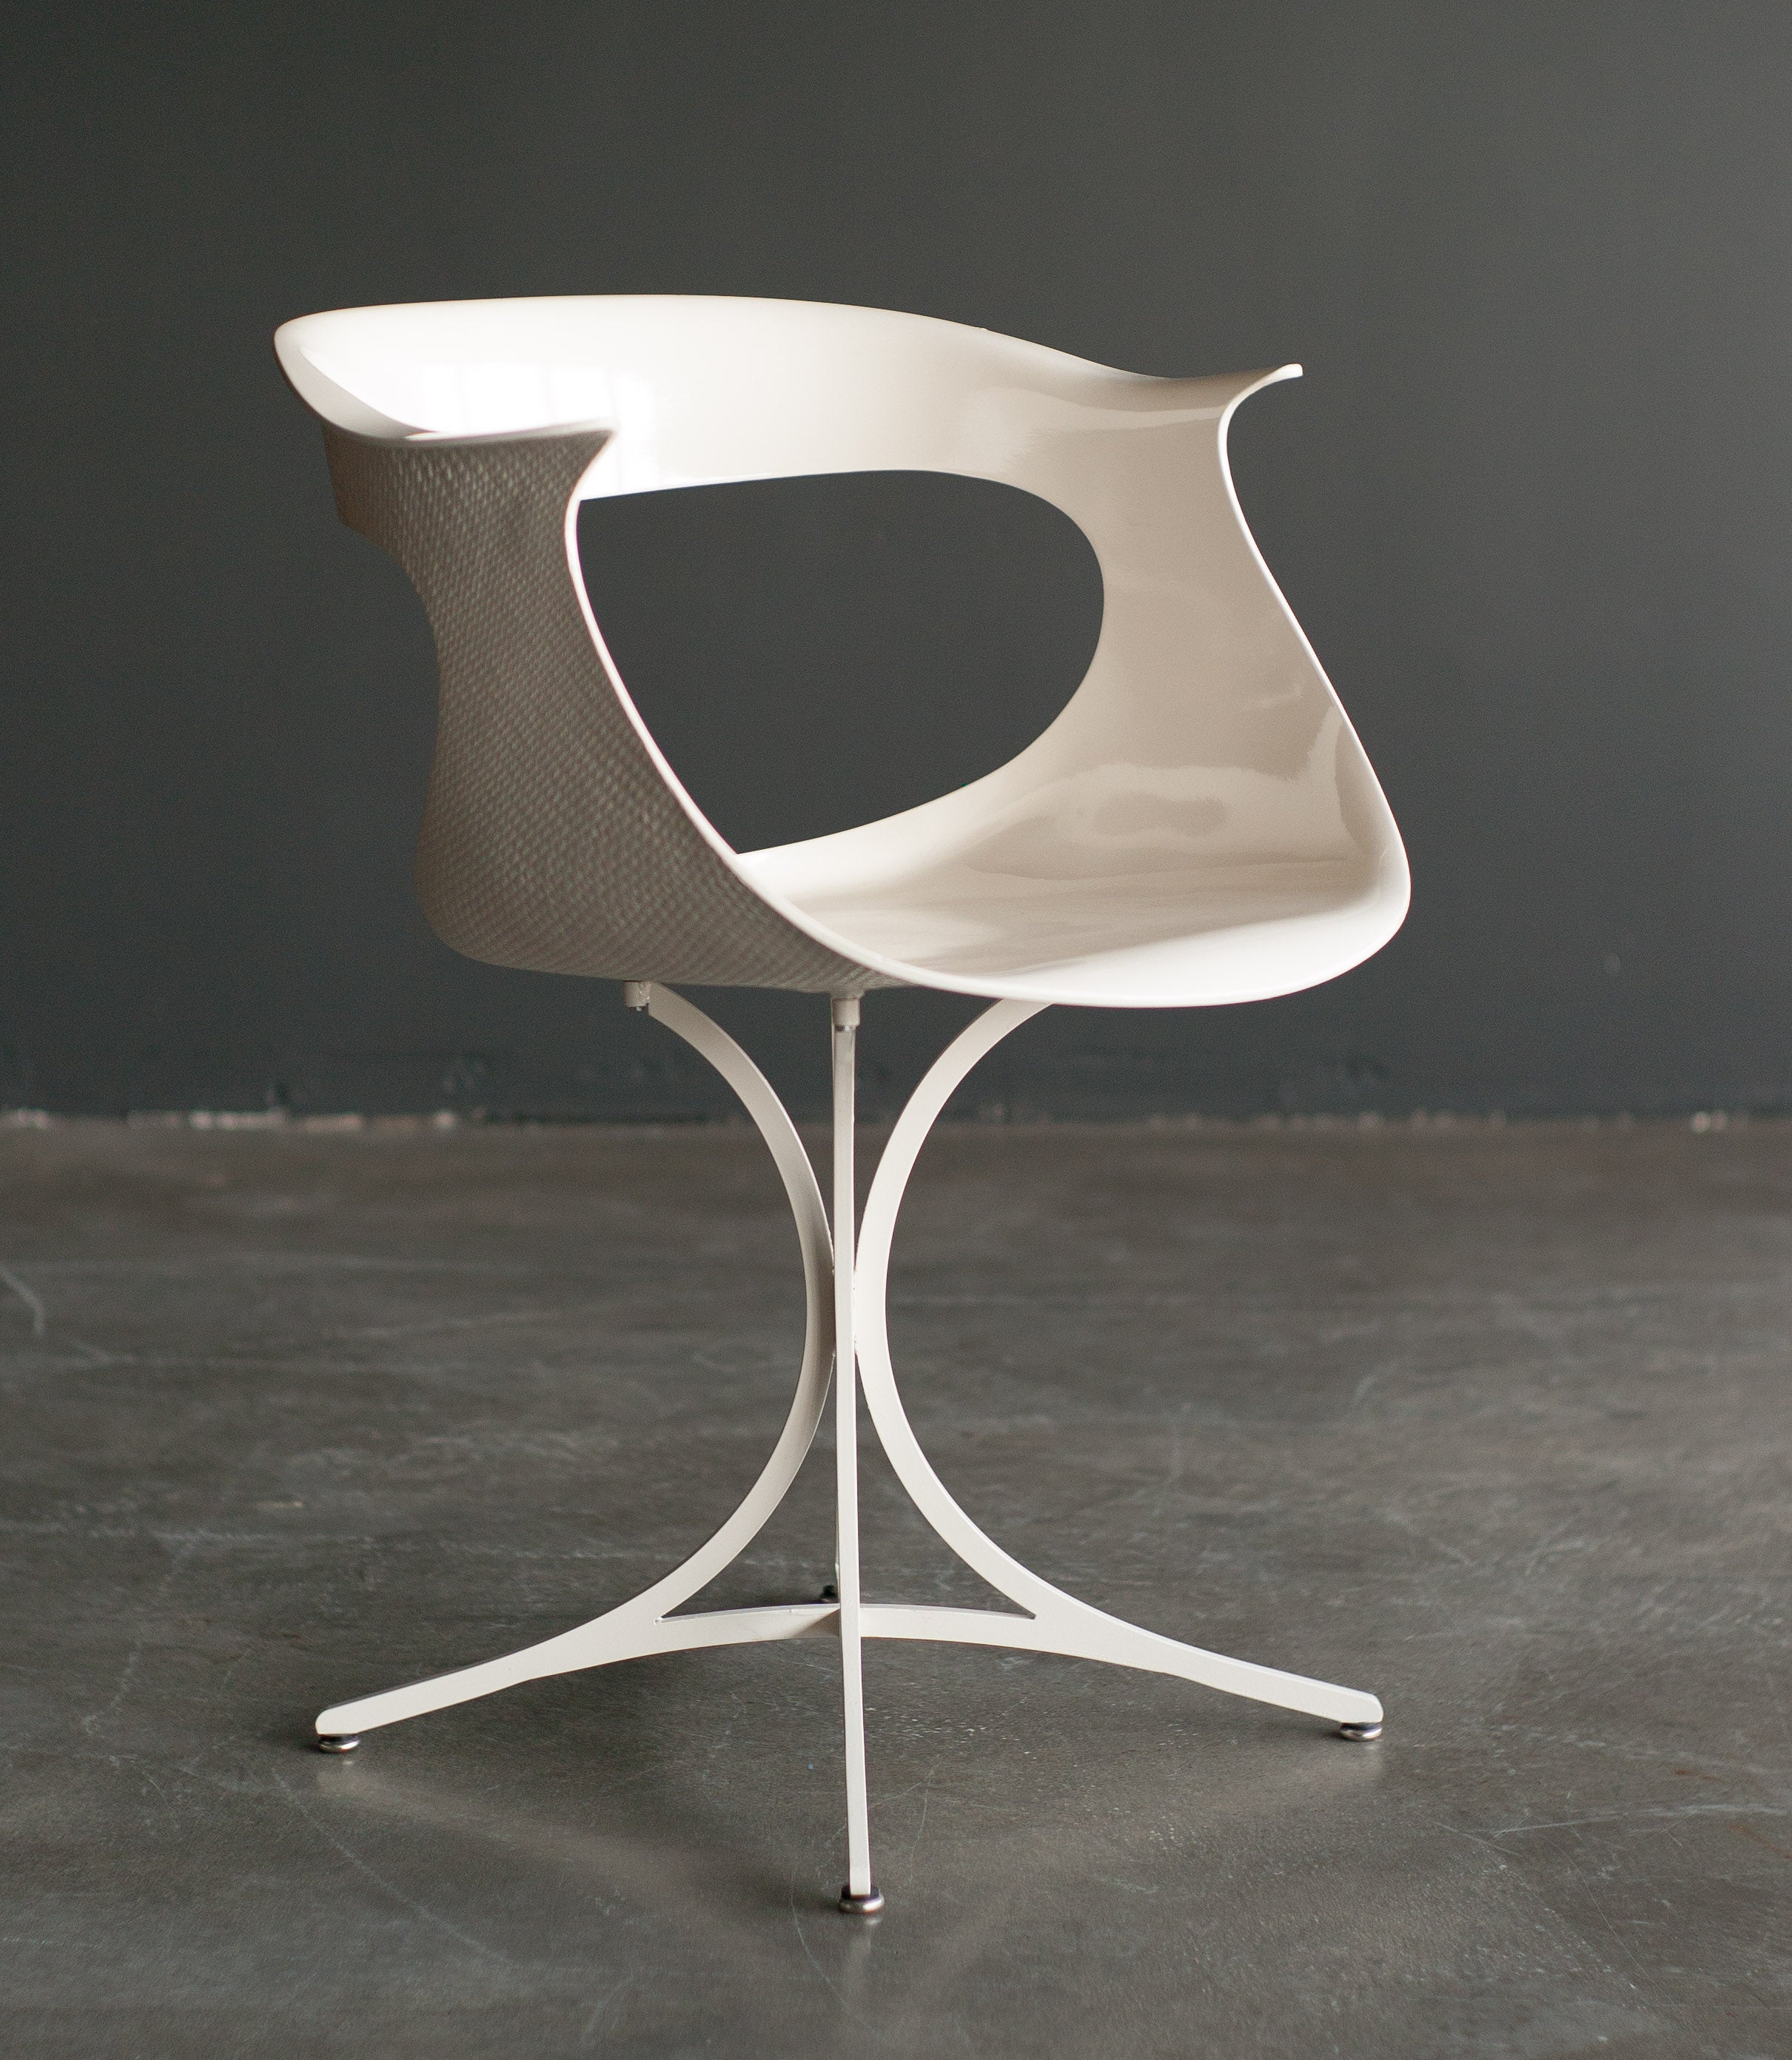 Lotus chair designed in 1958 by Erwine & Estelle Laverne.